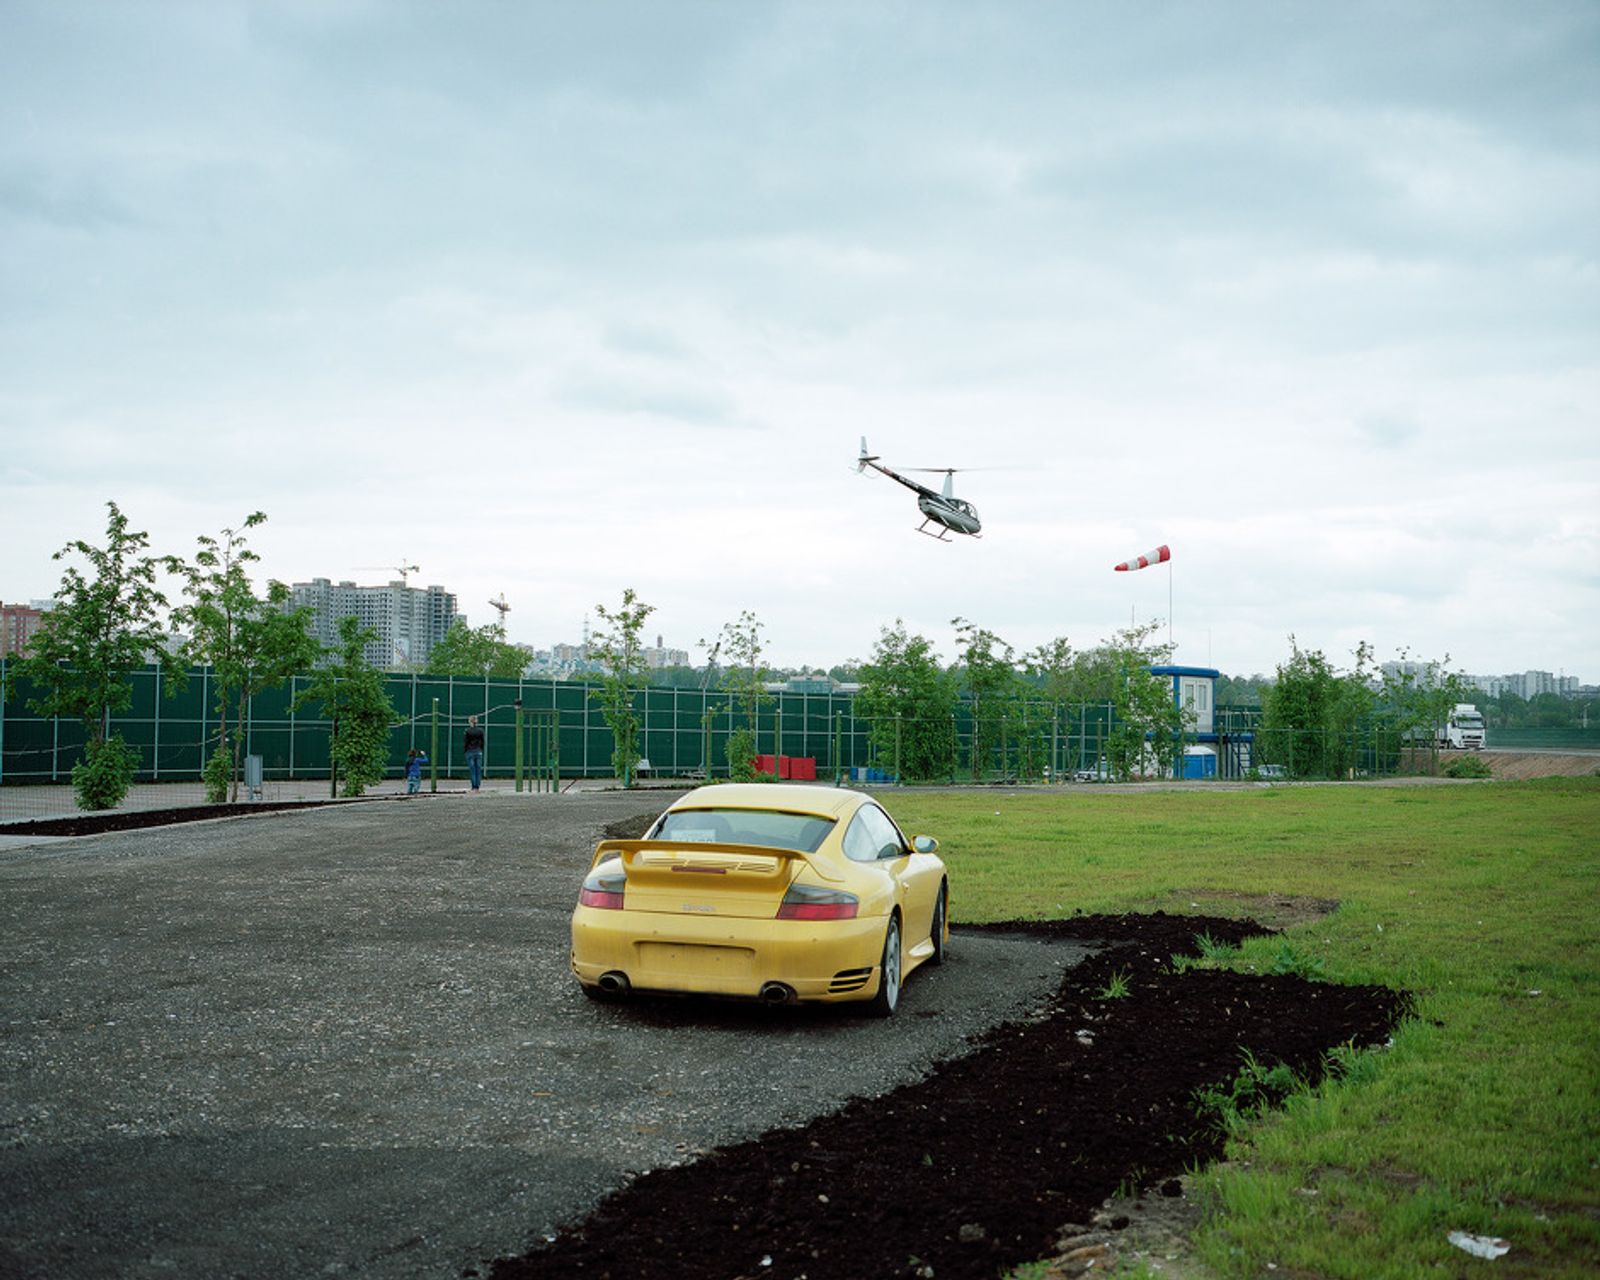 © Petr Antonov - Image from the Trees, cars, figures of people, assorted barriers photography project